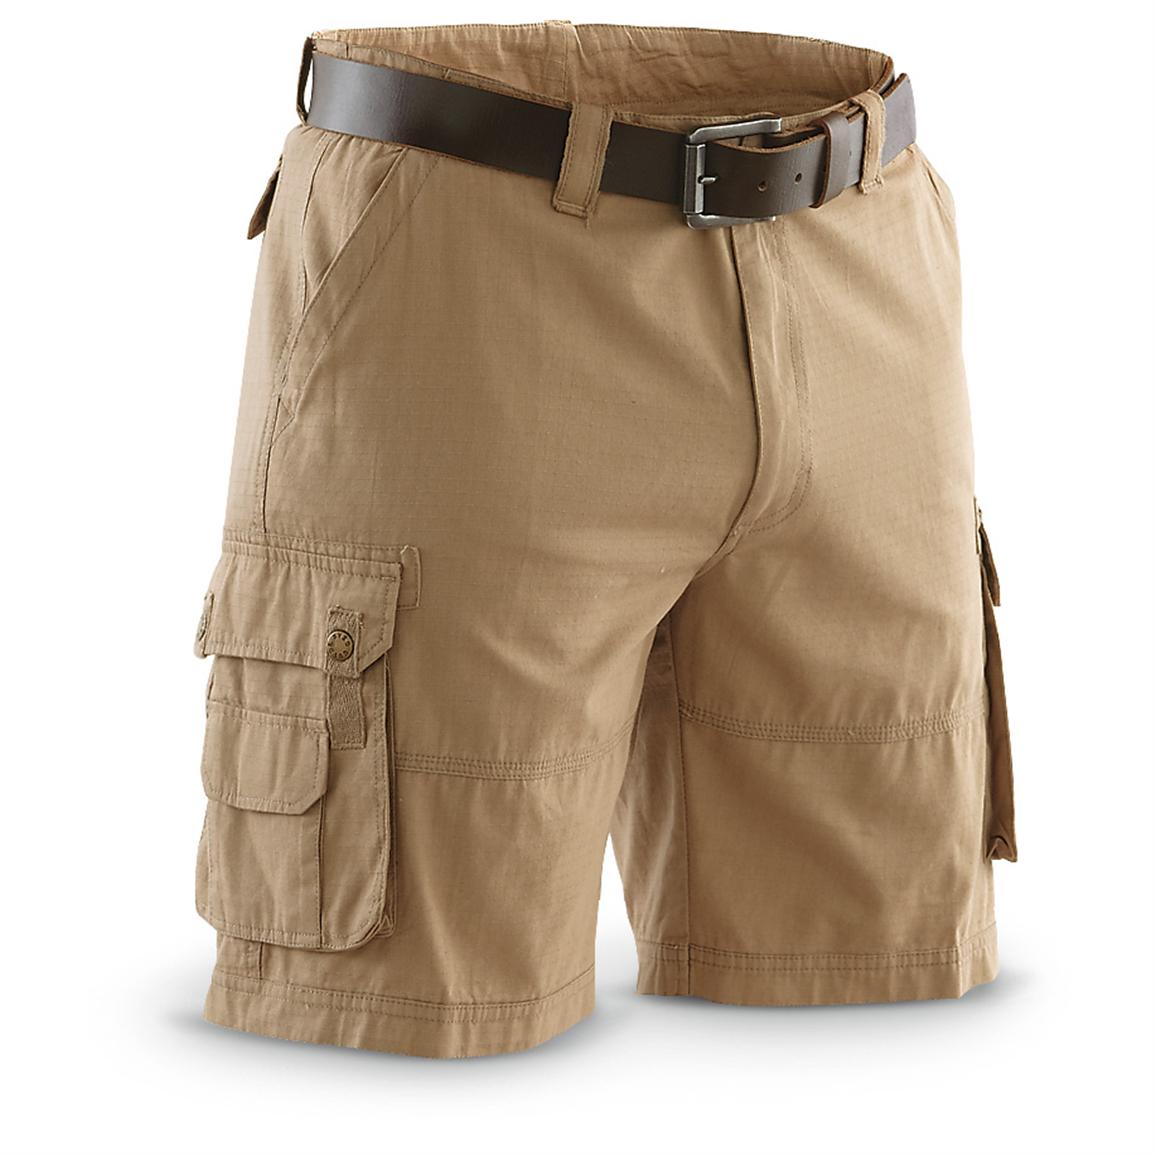 Guide Gear® Ripstop Cargo Shorts - 234386, Shorts at Sportsman's Guide